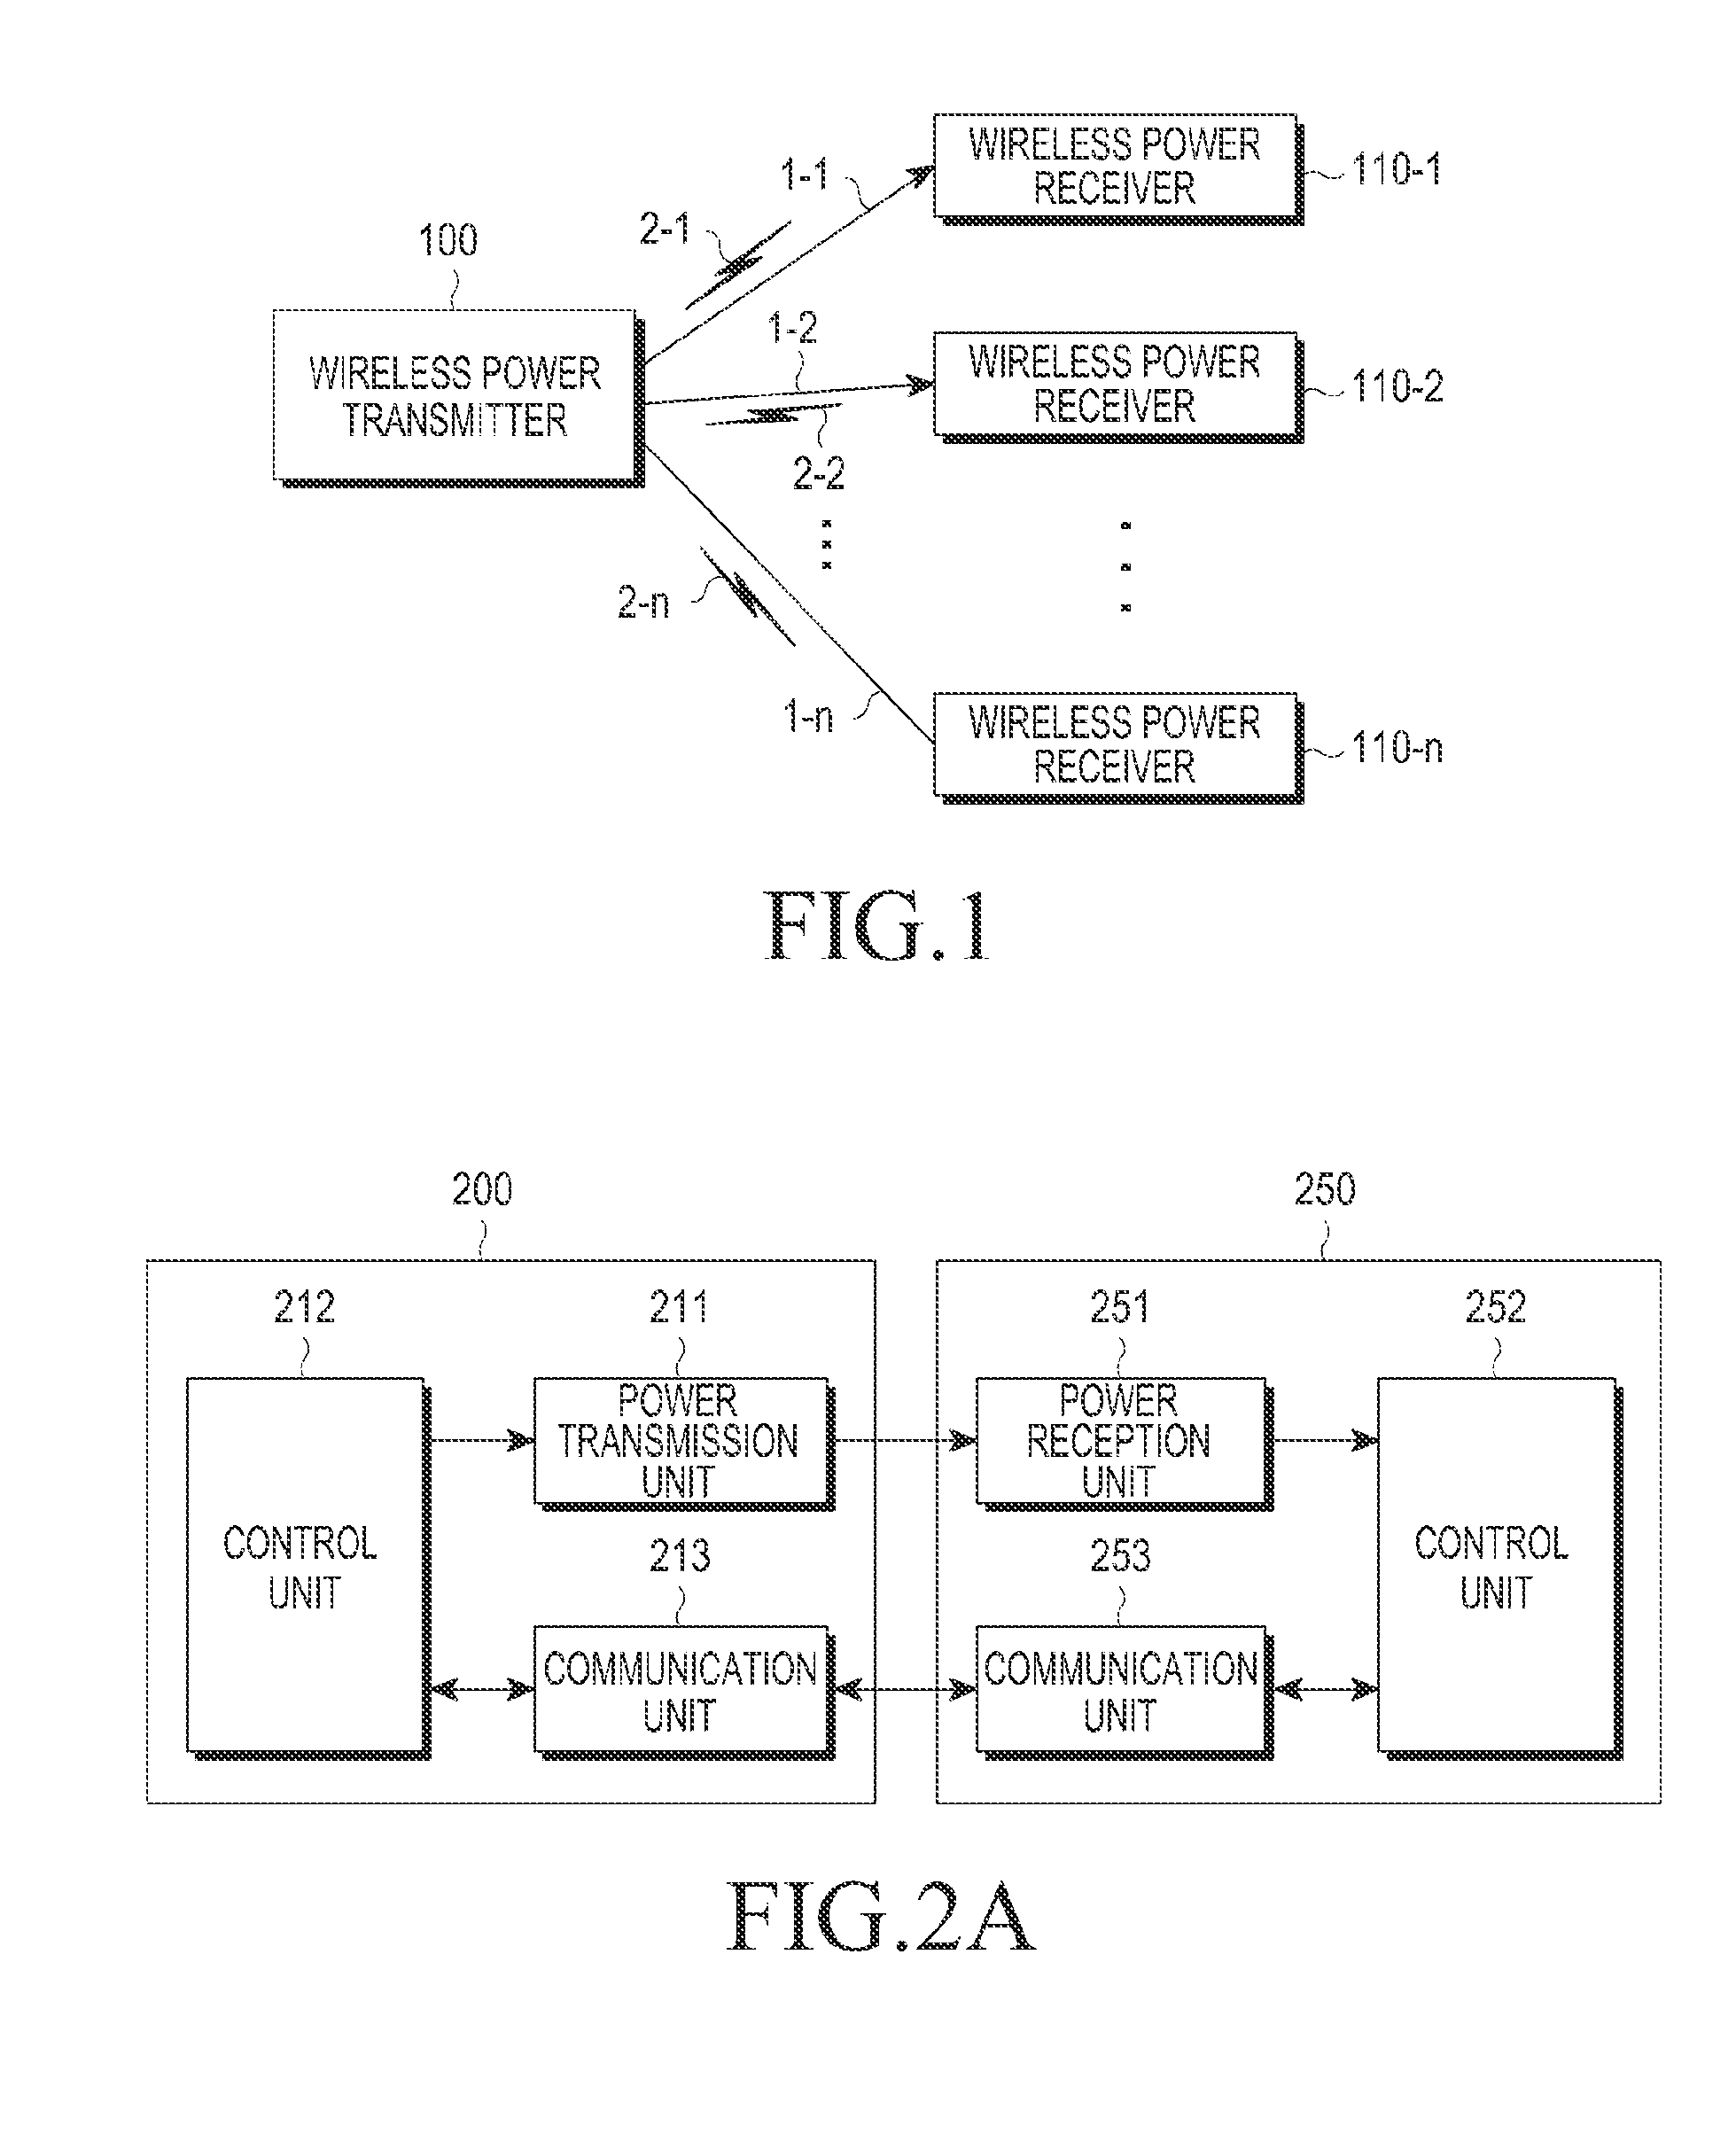 Wireless power receiver for increased charging efficiency